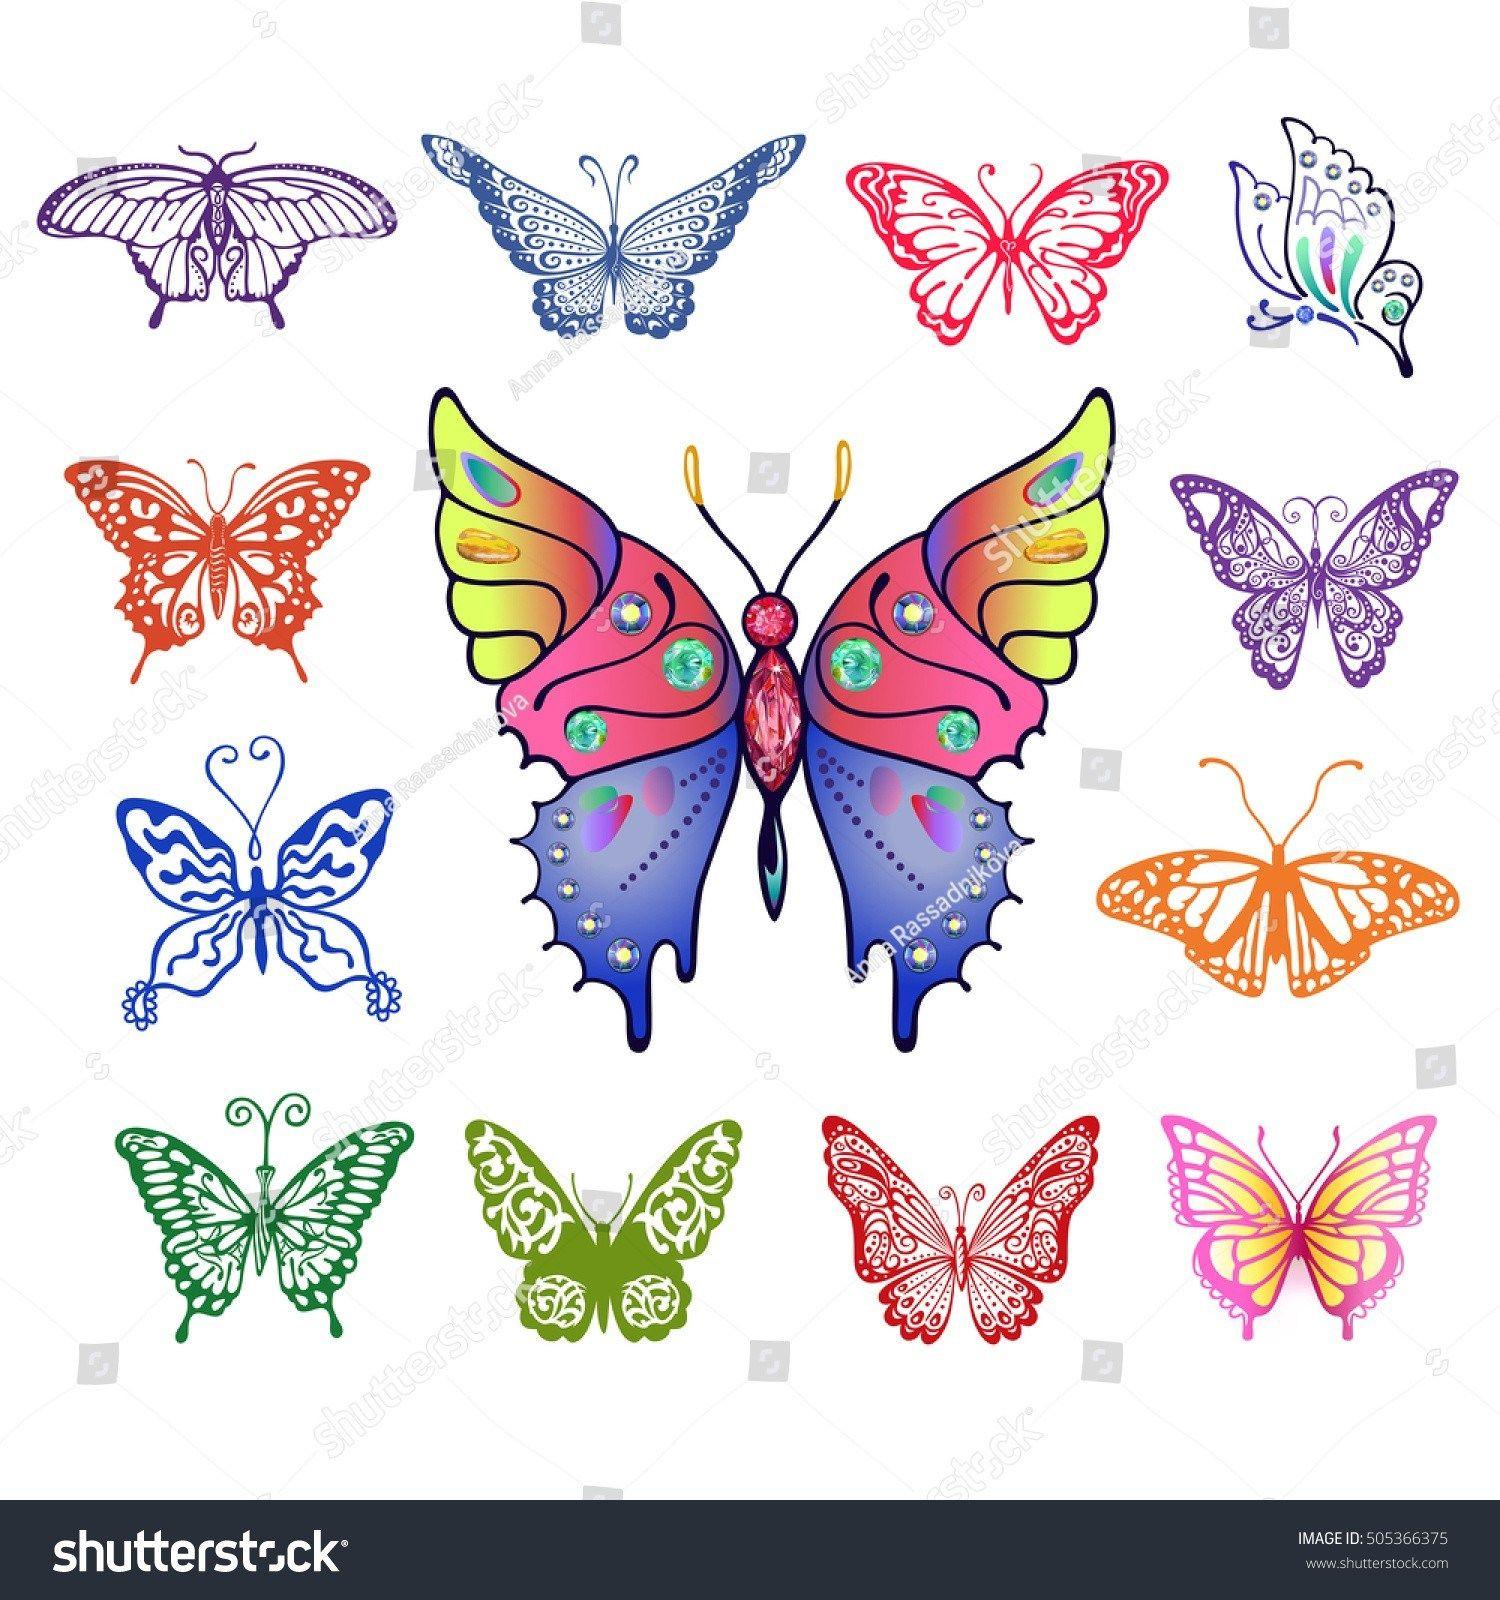 Rainbow Colored Butterfly Logo - Rainbow Colored Butterfly Logo